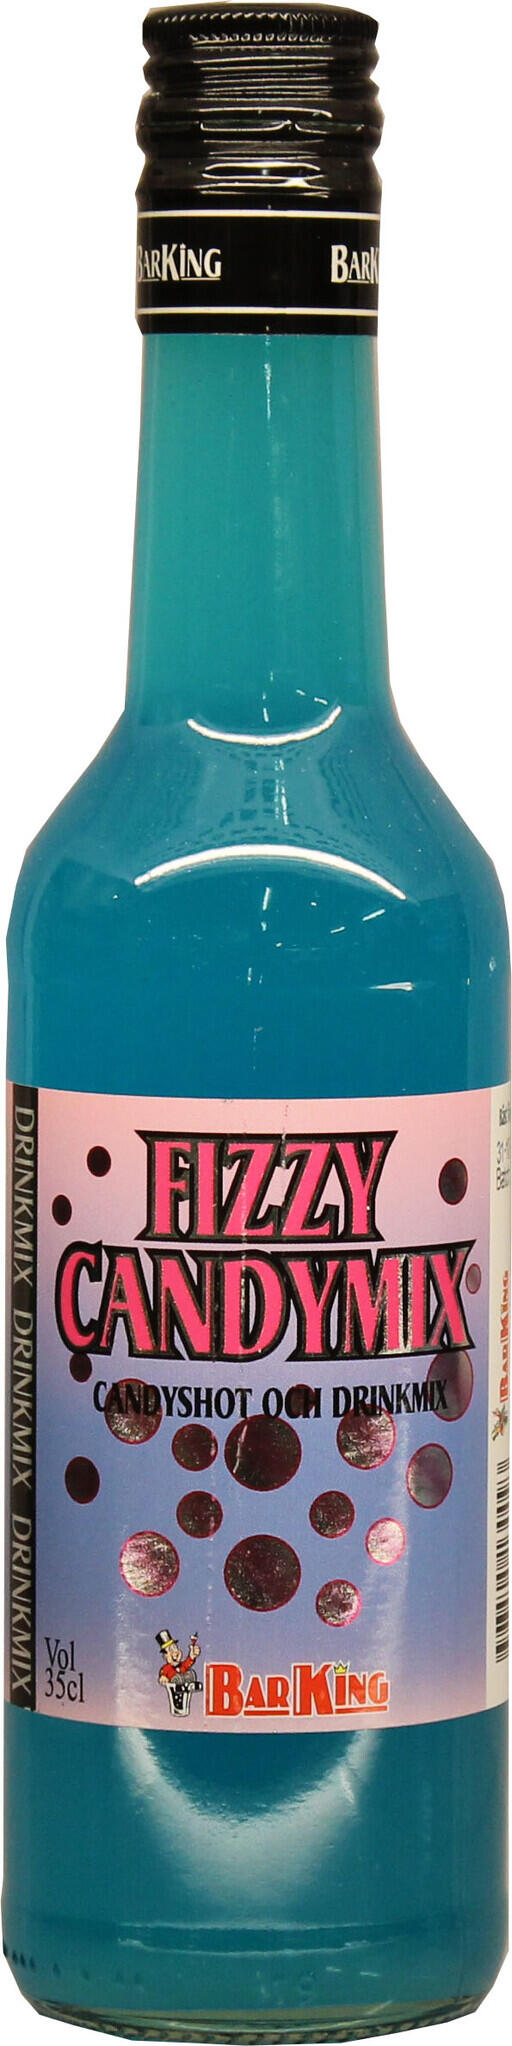 Fizzy Candymix 35cl